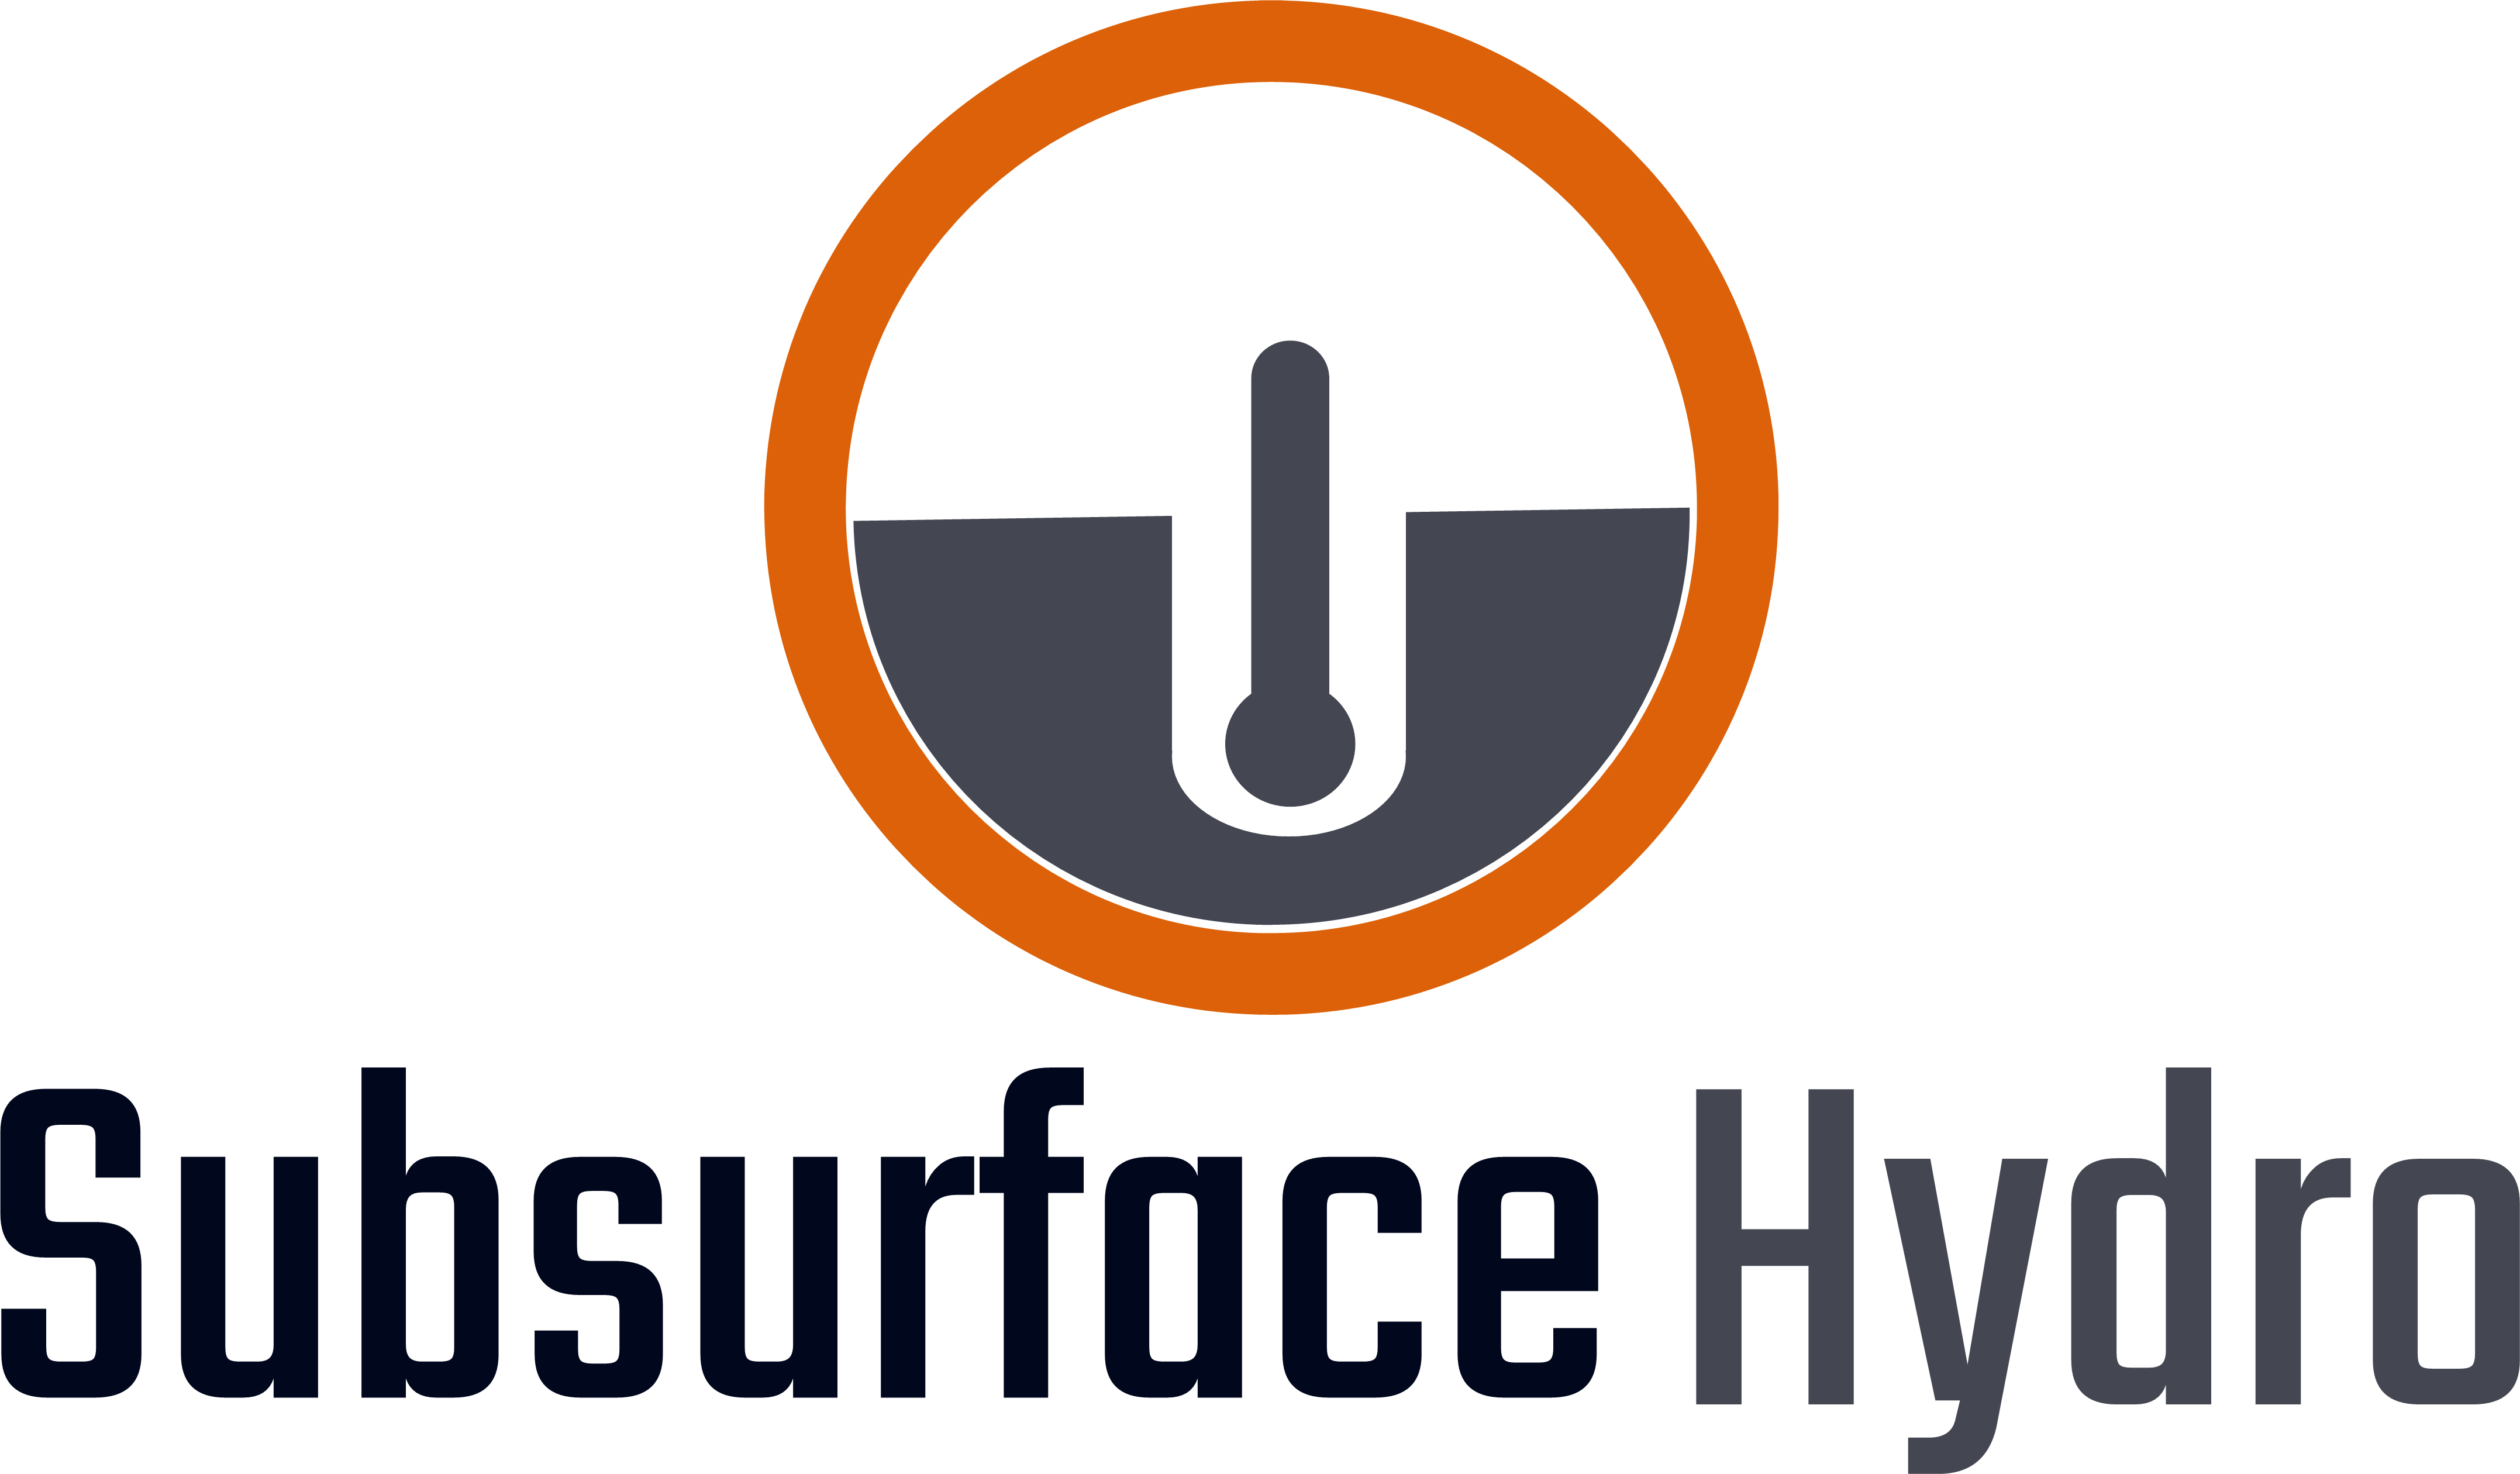 Subsurface Hydro